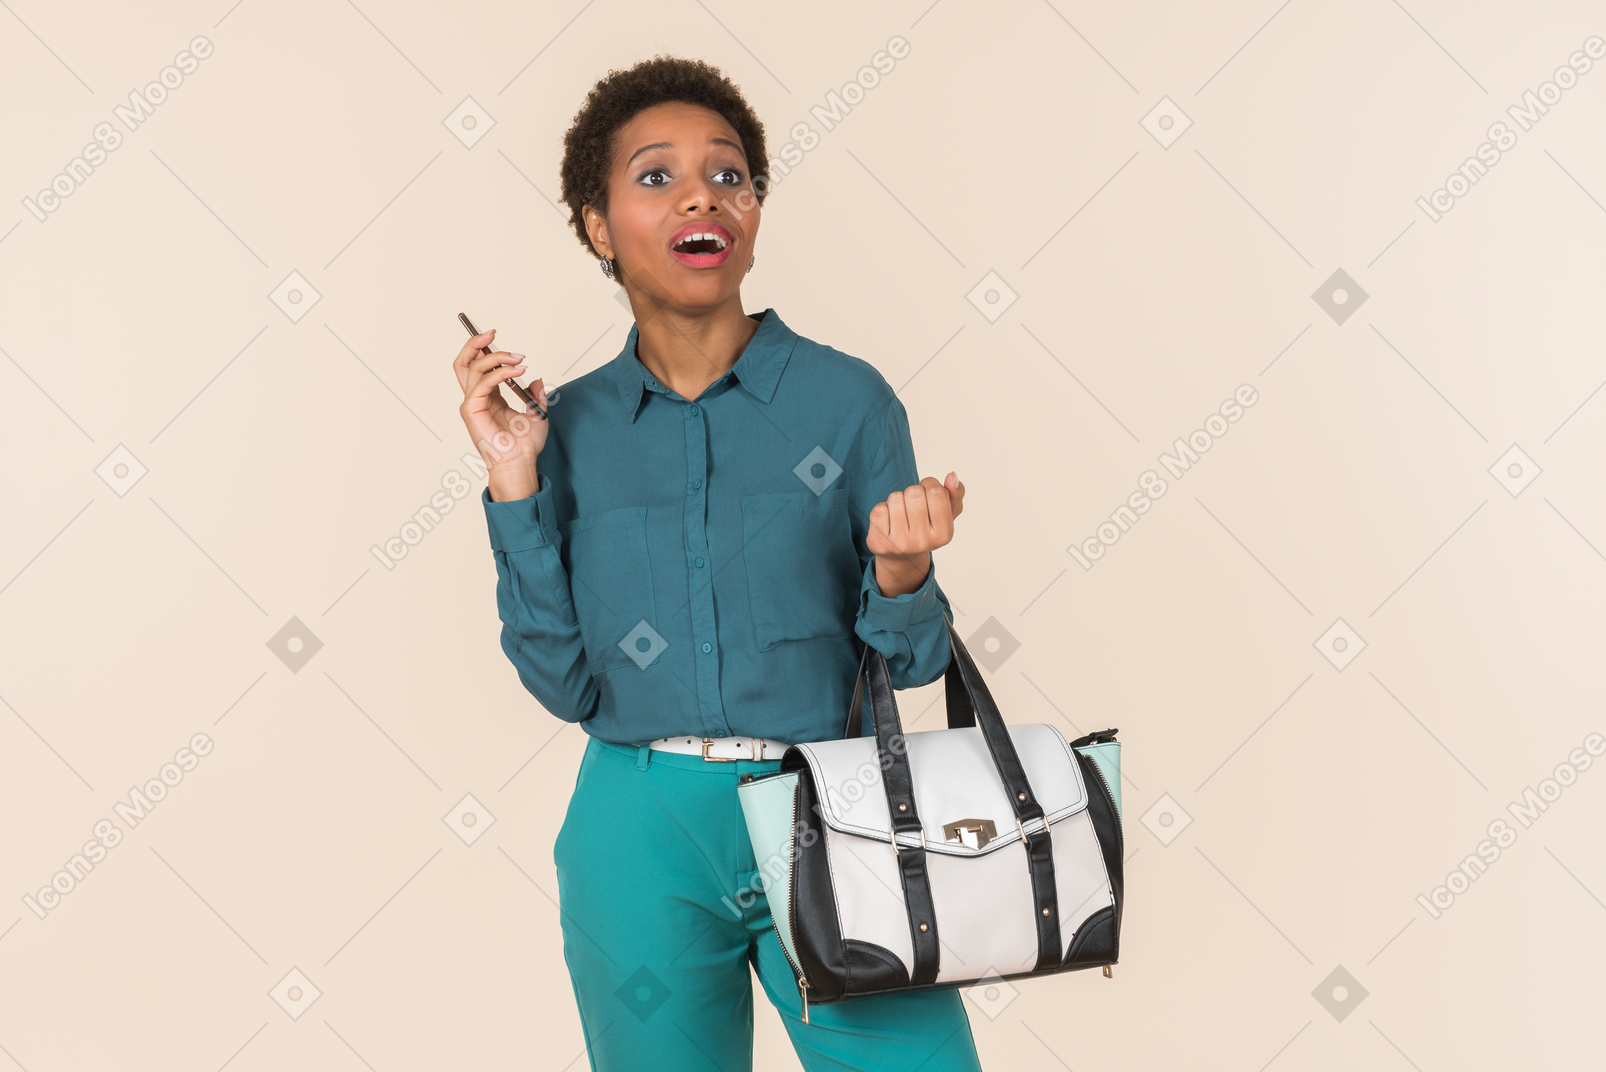 Doubting something young woman holding phone in one hand and bag on another